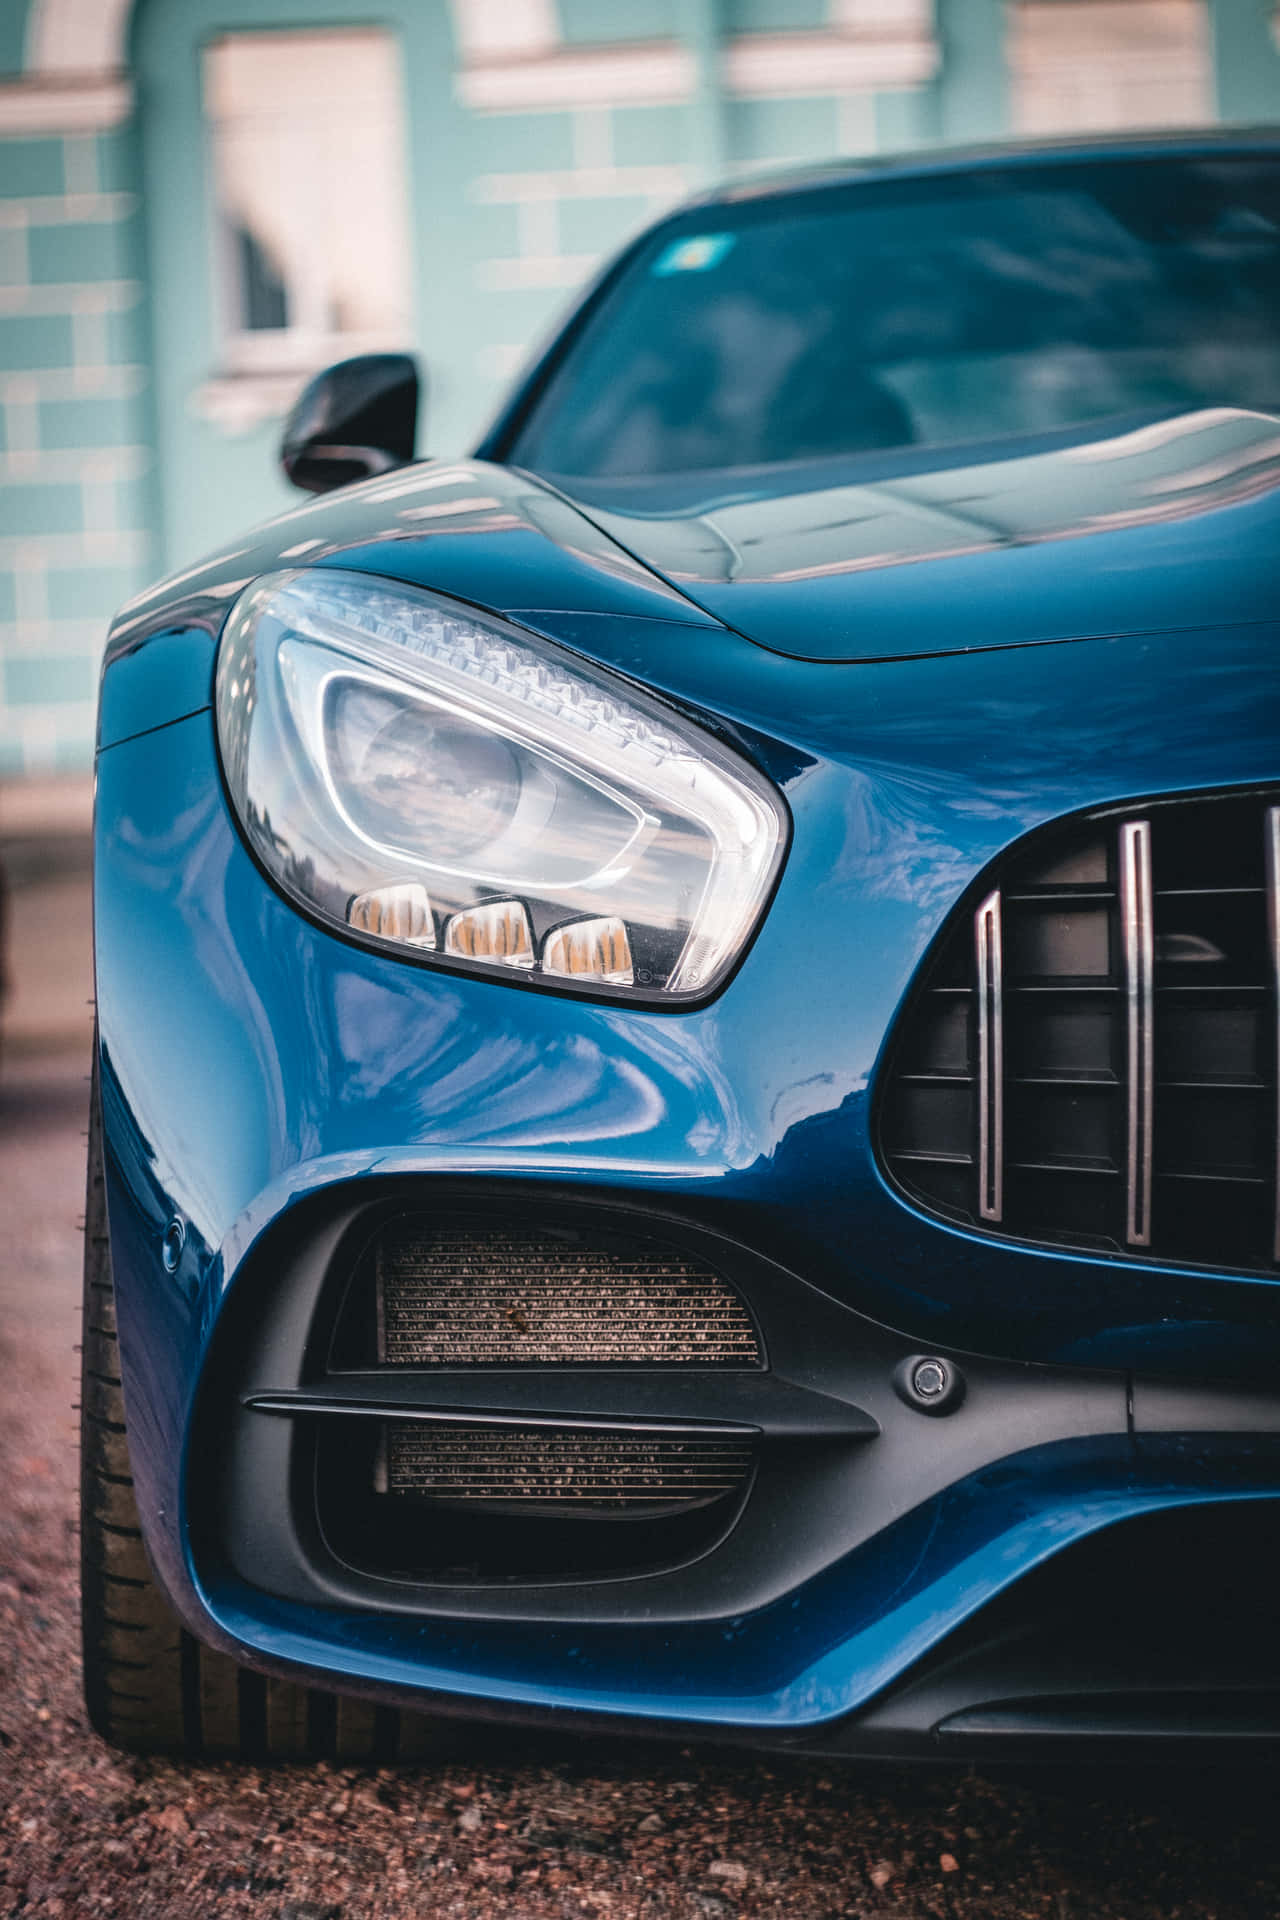 Mercedes Amg Gt - Front View Wallpaper